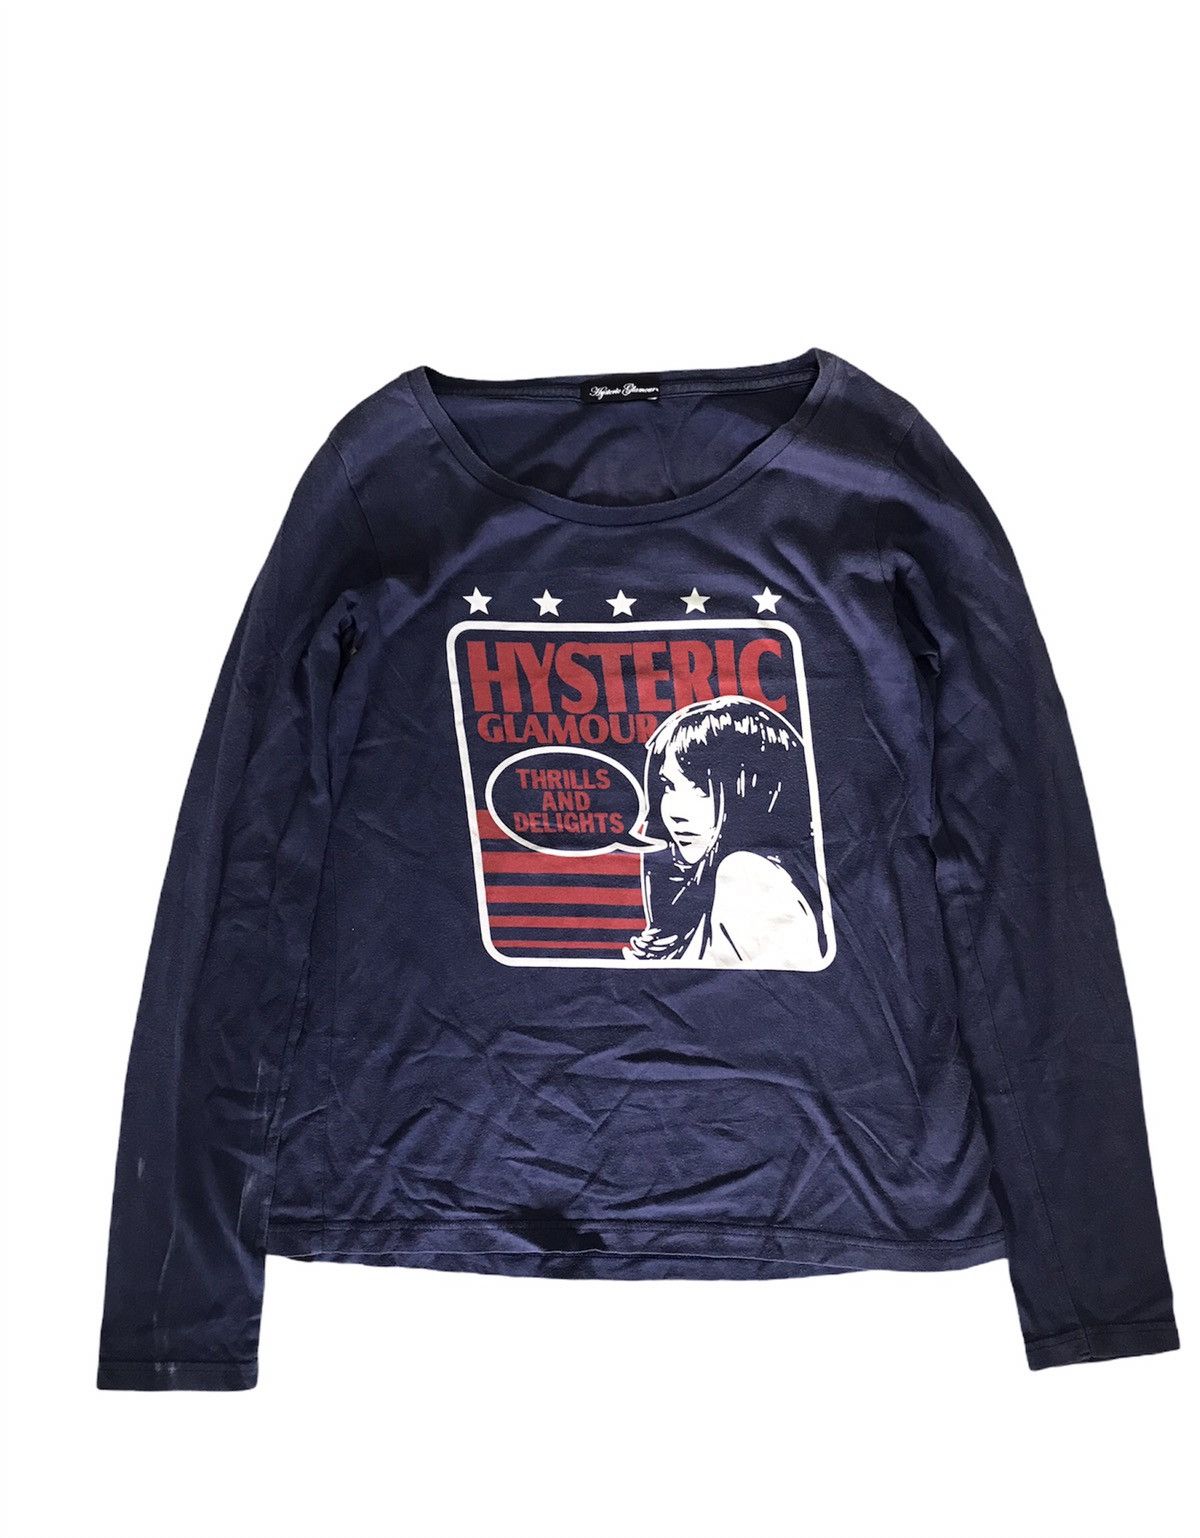 Hysteric Glamour Hysteric Glamour Thrills And Delight Long sleeve